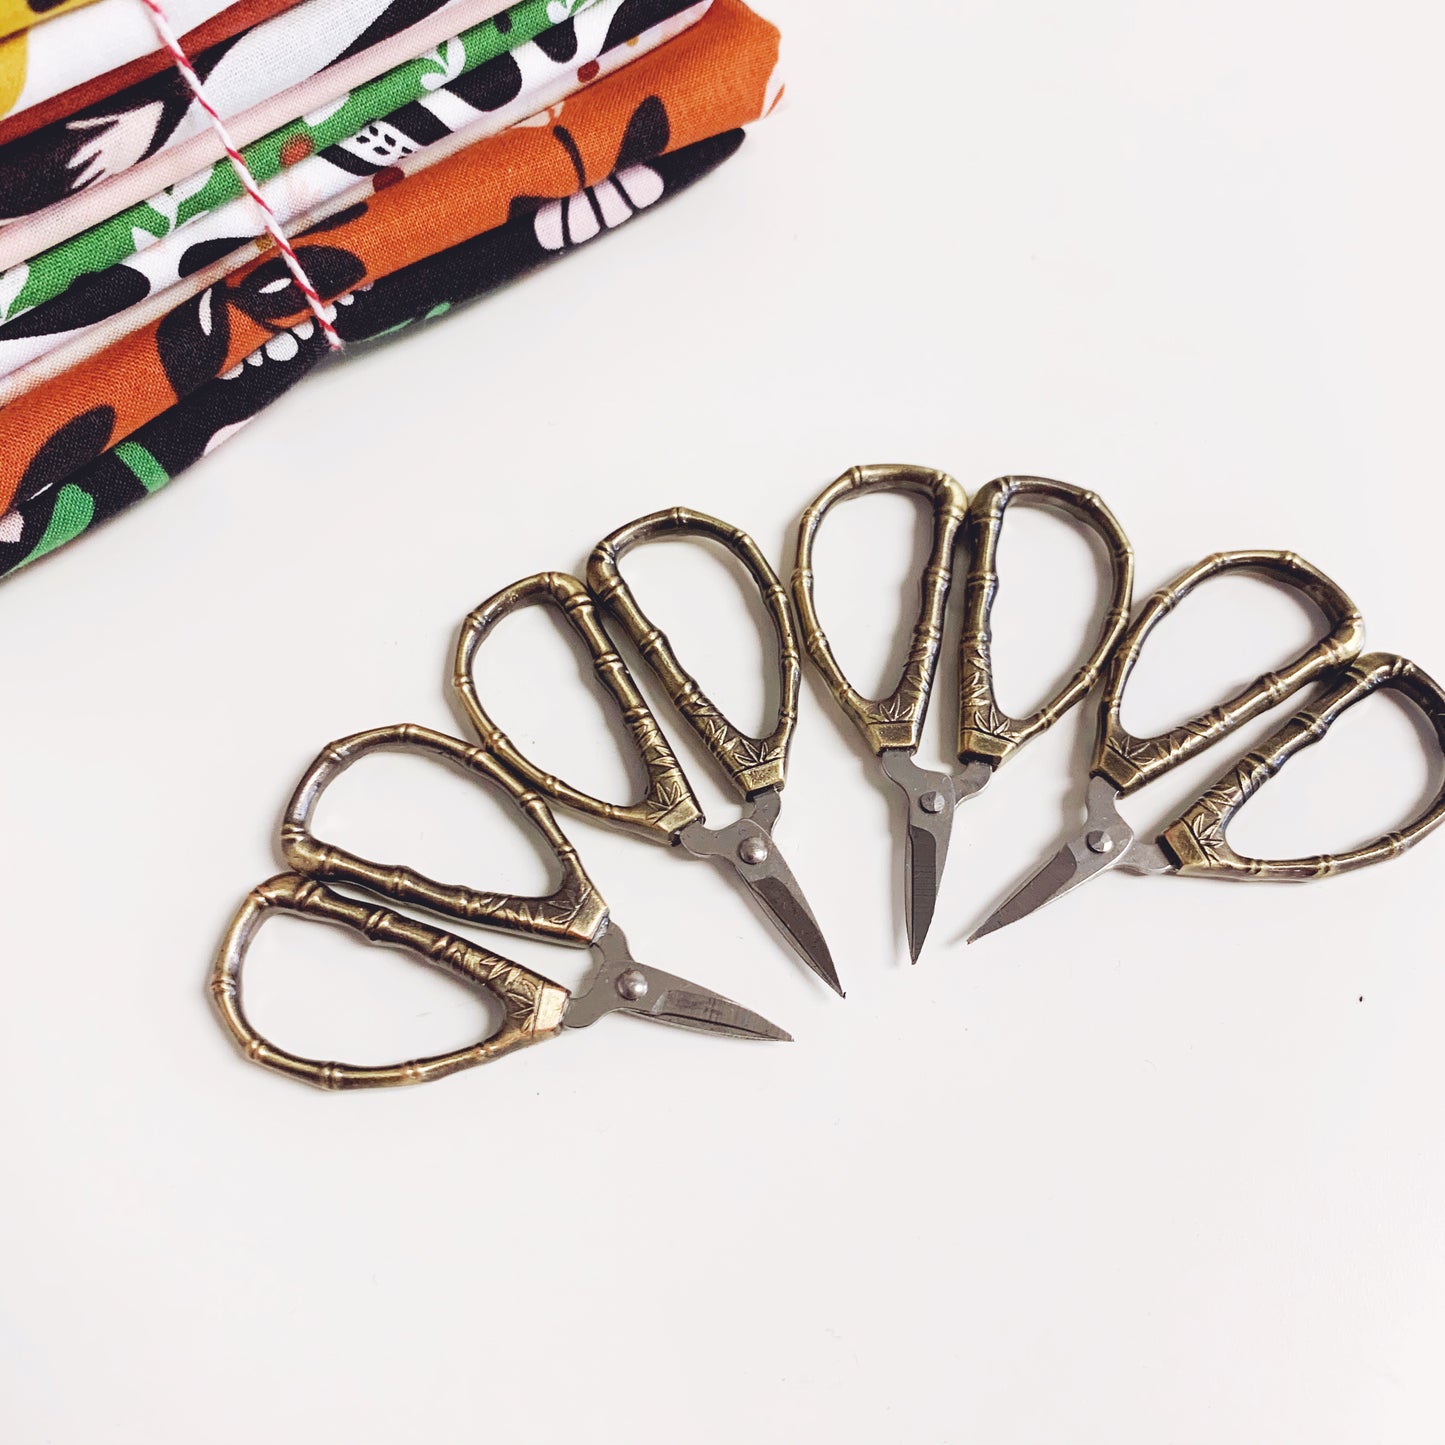 Mini Totem Vintage Gold Stainless Steel Embroidery Scissors